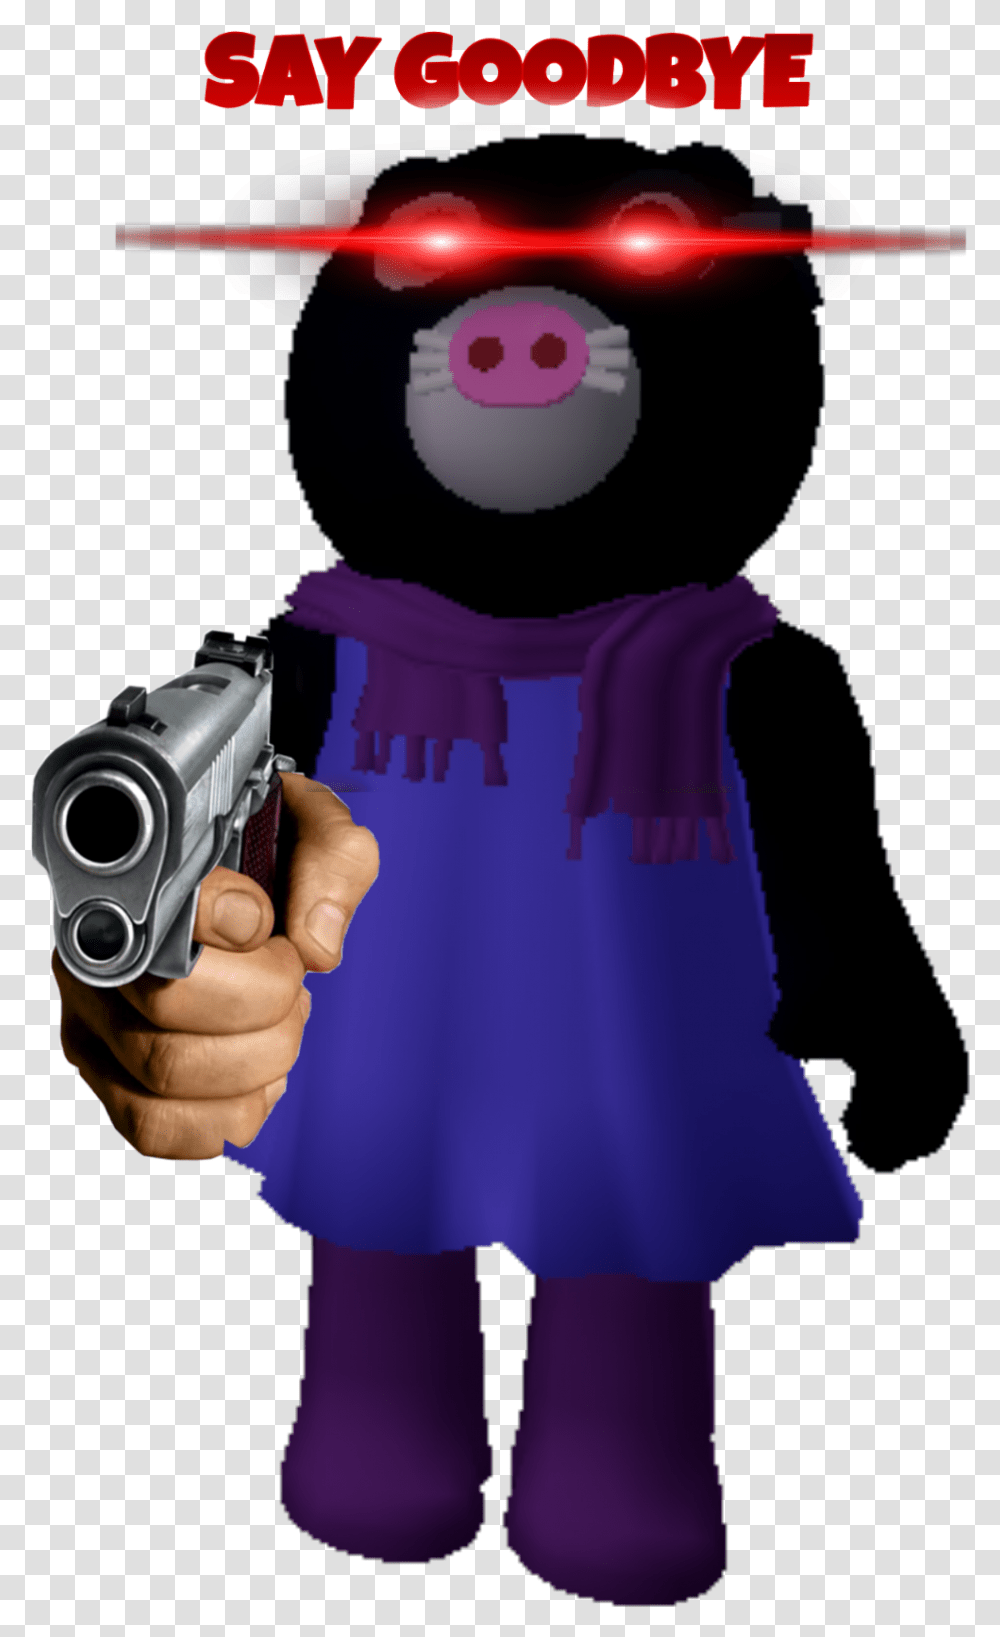 Mimi When You Ship Her With Giraffy Be Like Robloxpiggy Mimi Piggy Not Infected, Handgun, Weapon, Weaponry, Camera Transparent Png